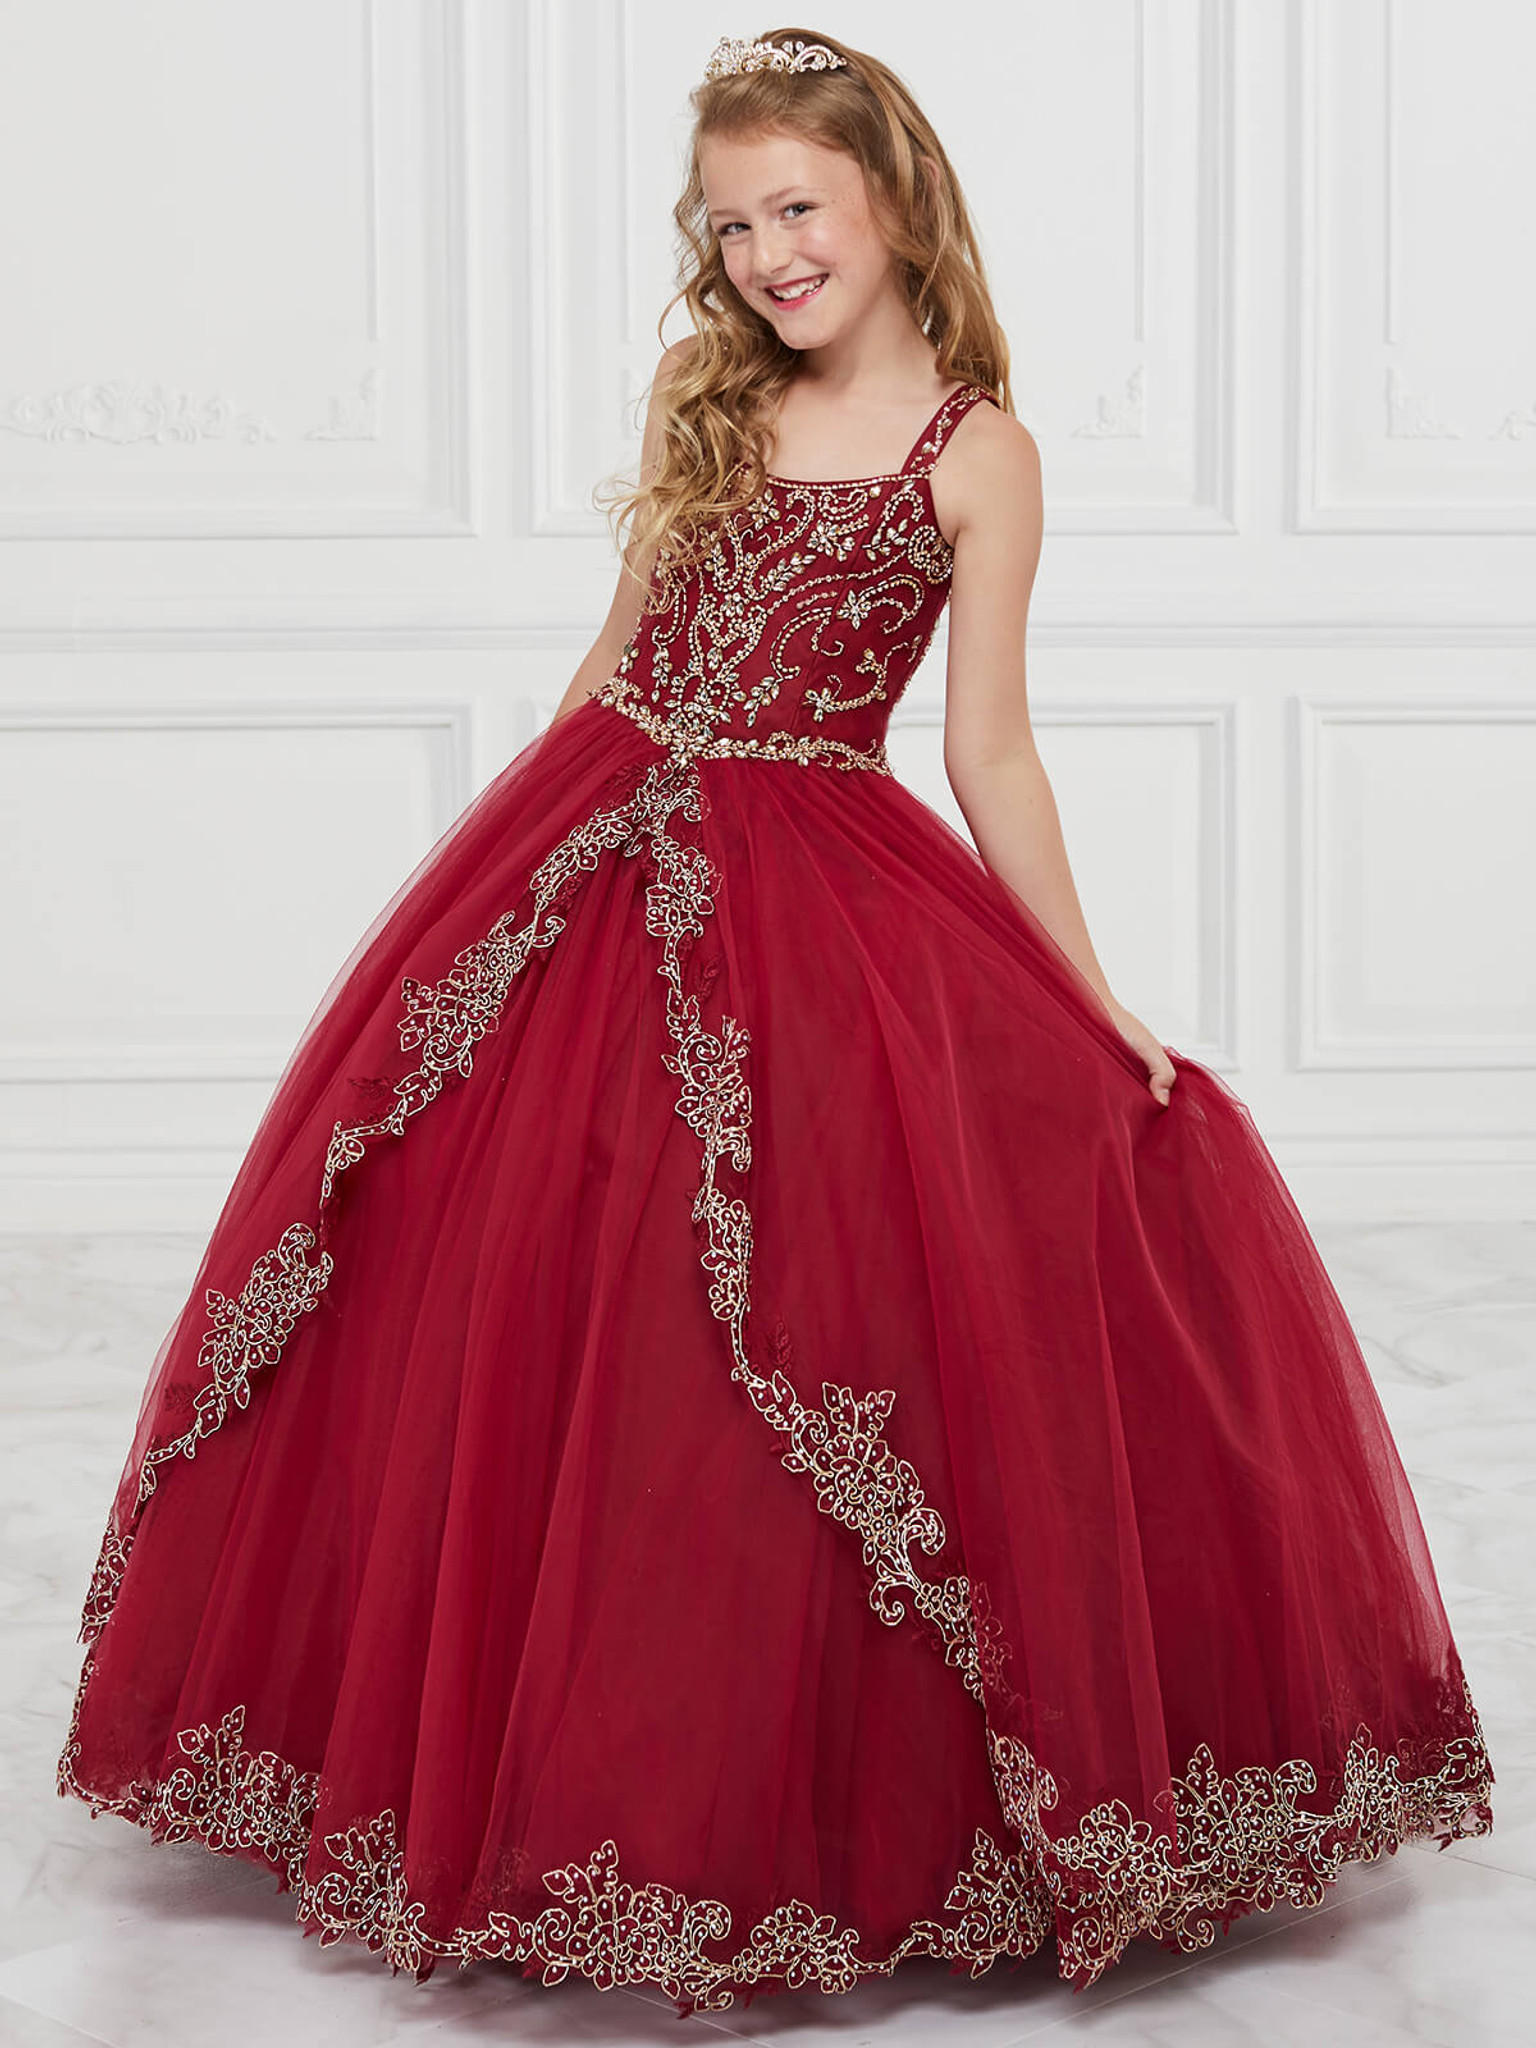 Tulle Neckline Tiffany Princess 13600 Pageant Dress PageantDesigns